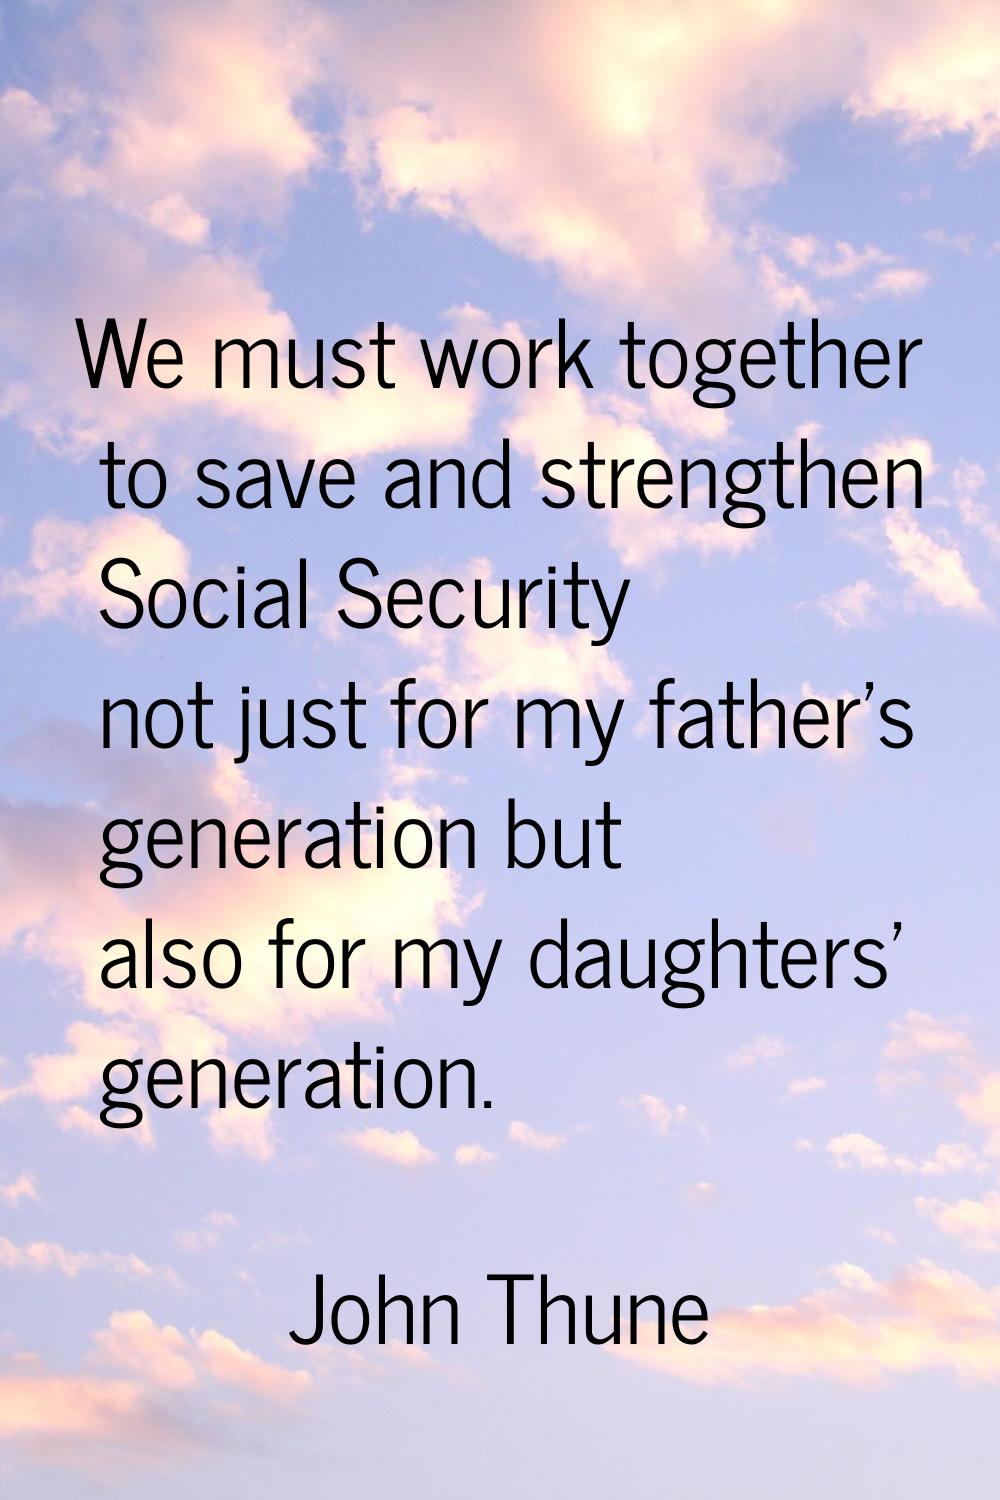 We must work together to save and strengthen Social Security not just for my father's generation bu